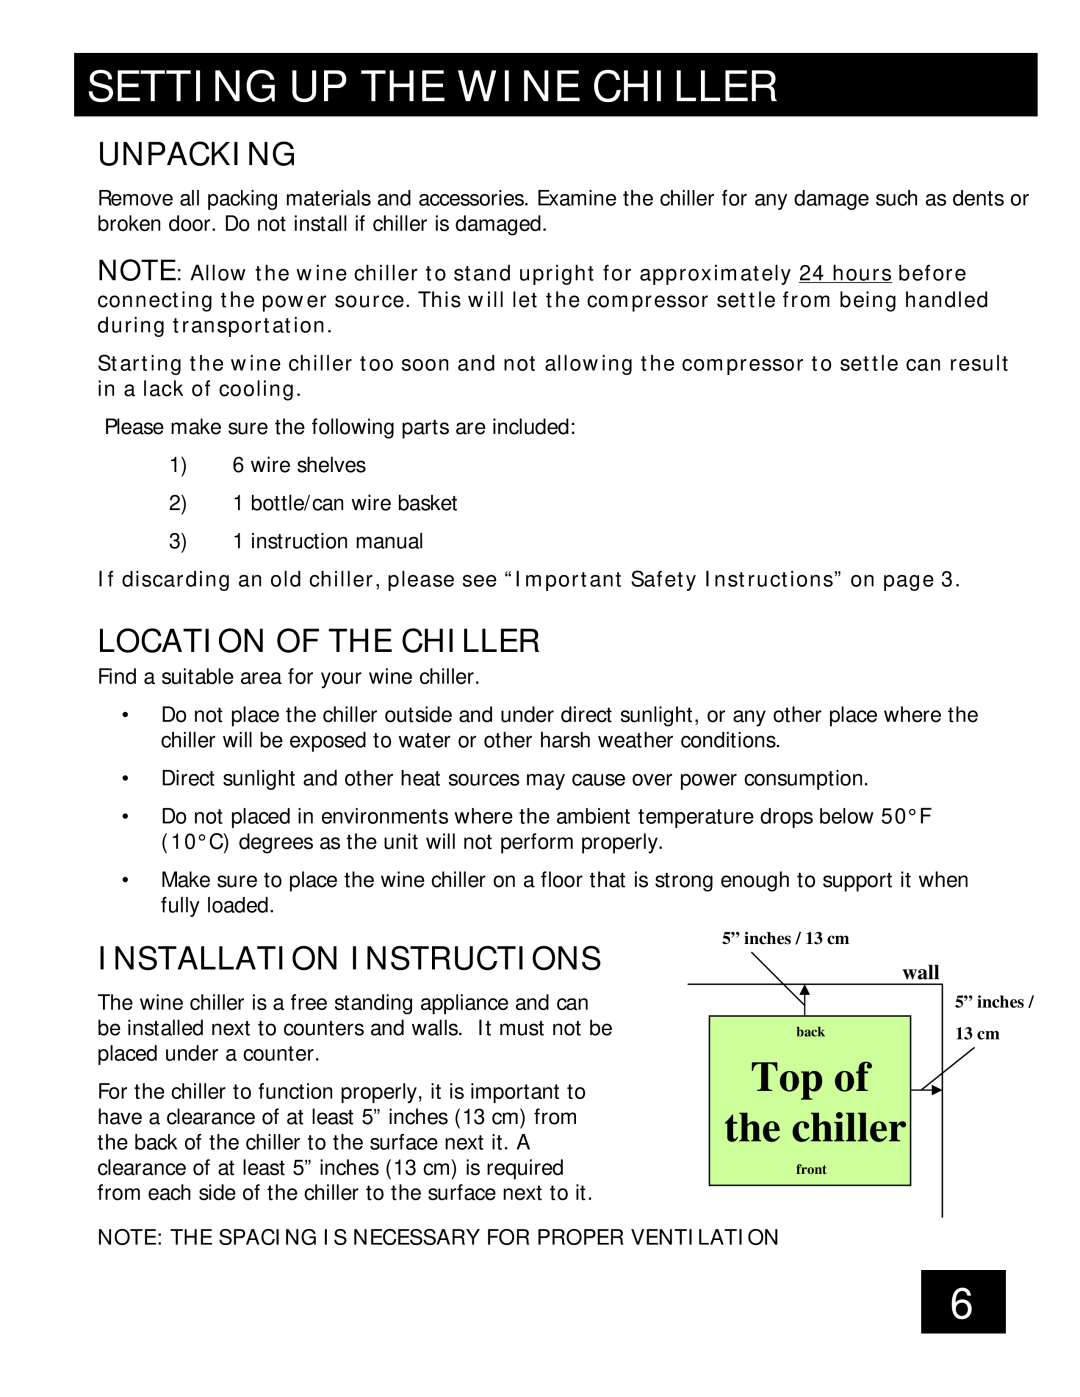 Honeywell 88080 Setting Up The Wine Chiller, Unpacking, Location Of The Chiller, Installation Instructions, the chiller 